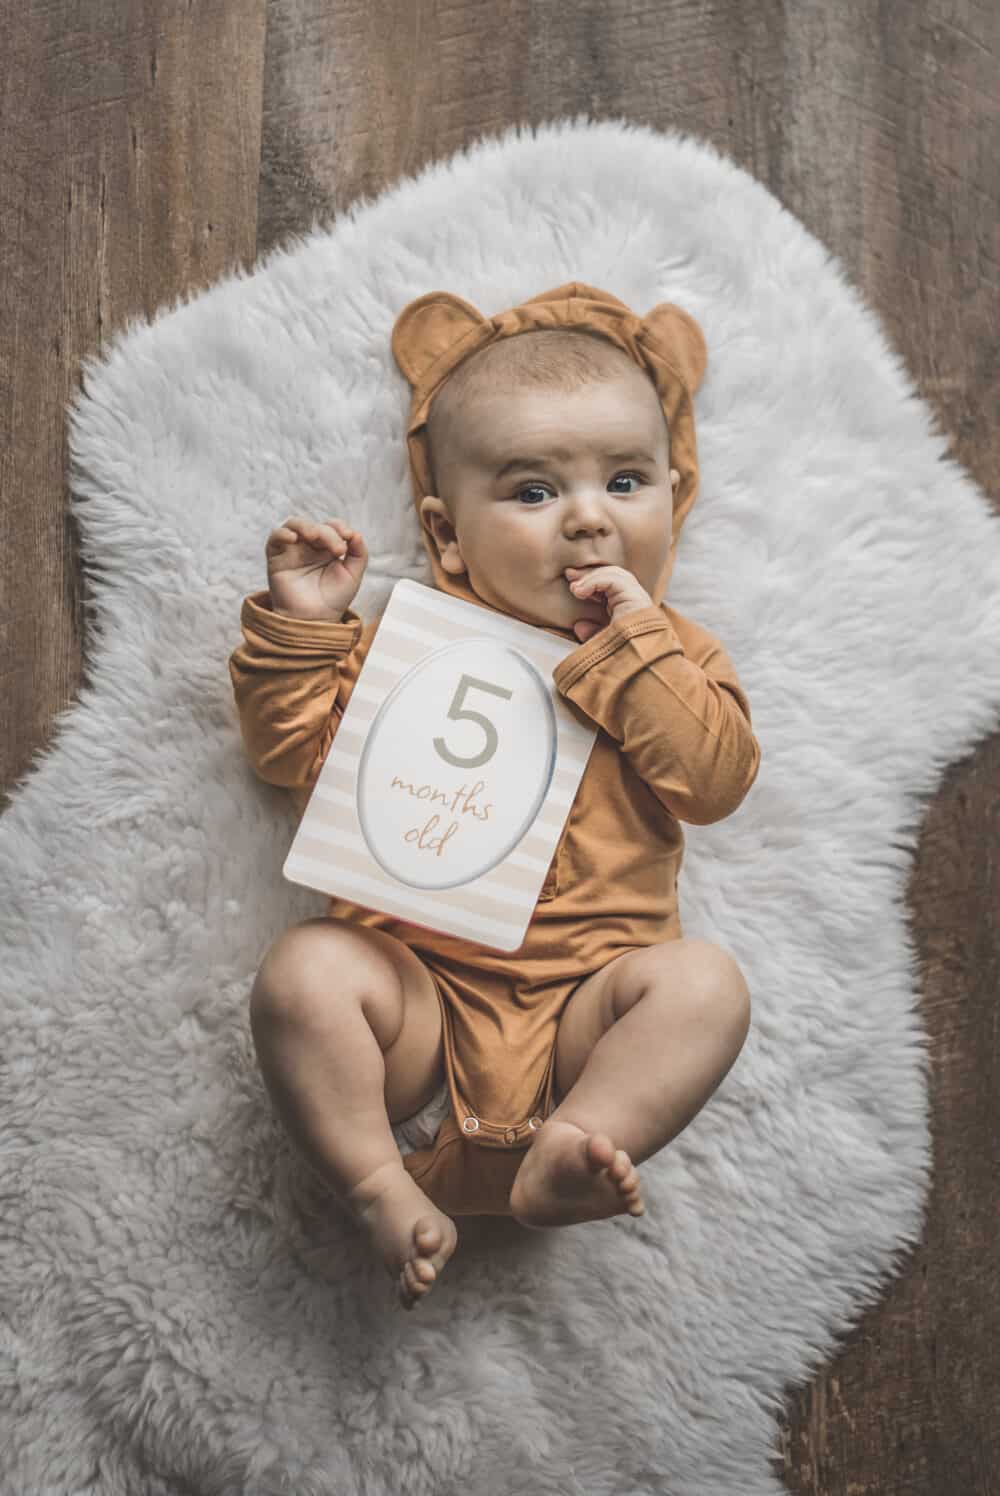 A baby wearing a teddy bear holding a number sign.